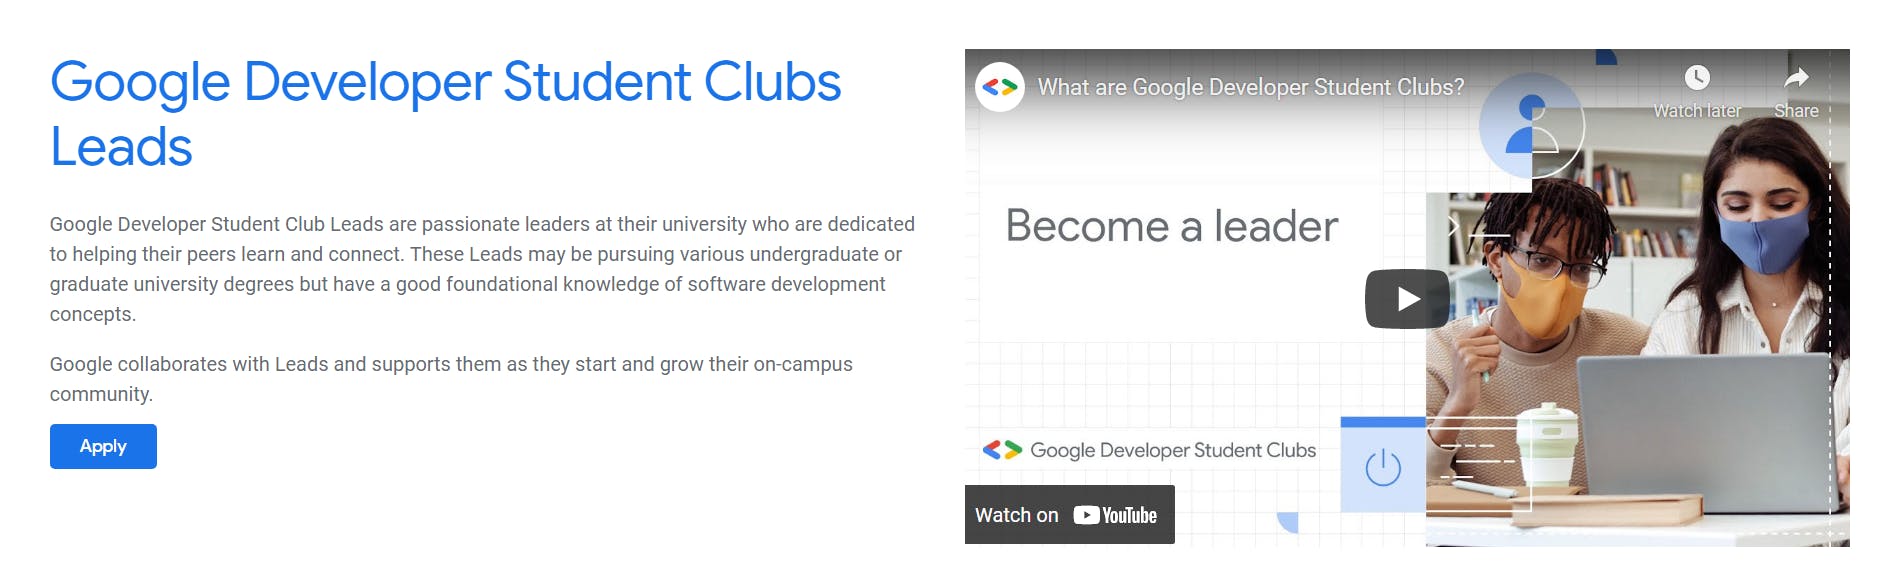 Become a Google Developer Student Club Lead at your campus